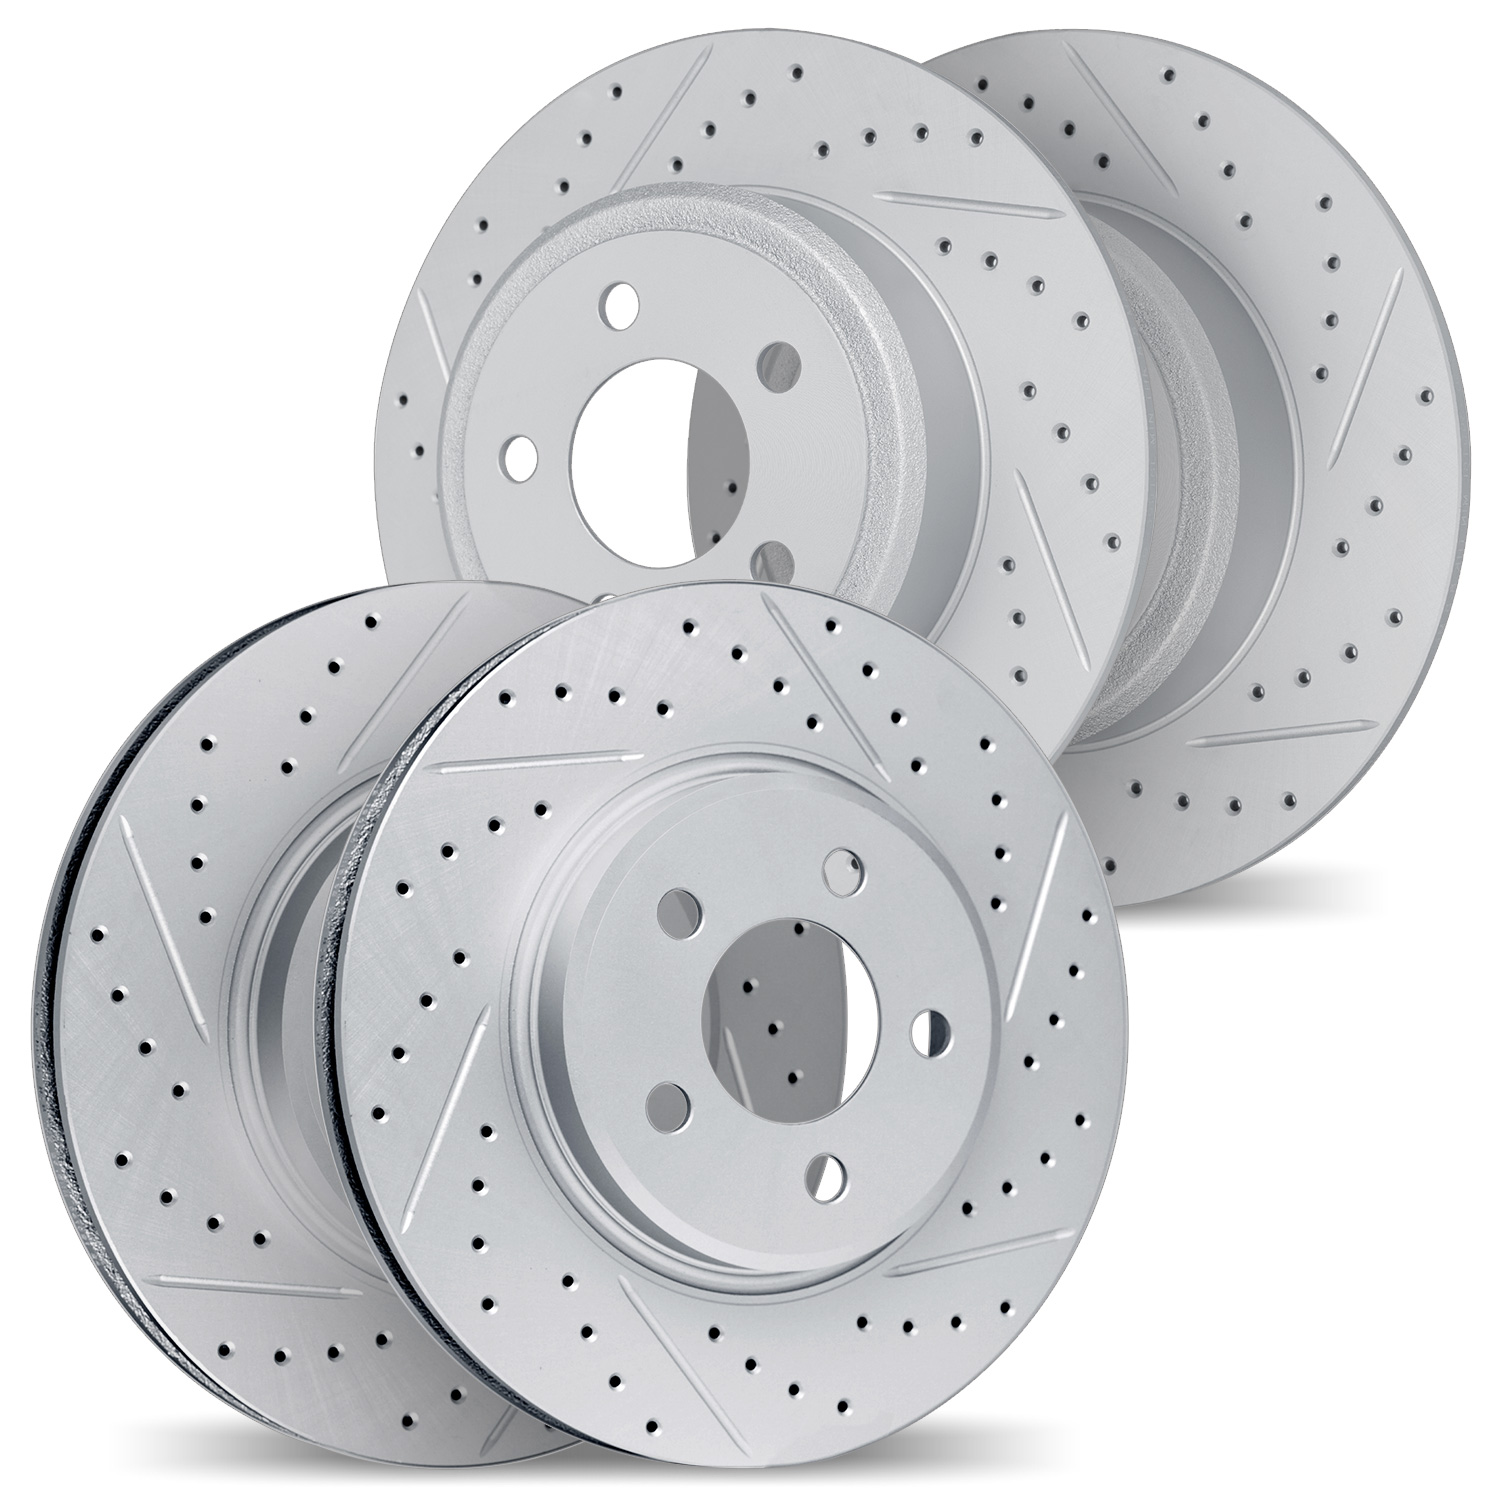 2004-42005 Geoperformance Drilled/Slotted Brake Rotors, Fits Select Mopar, Position: Front and Rear